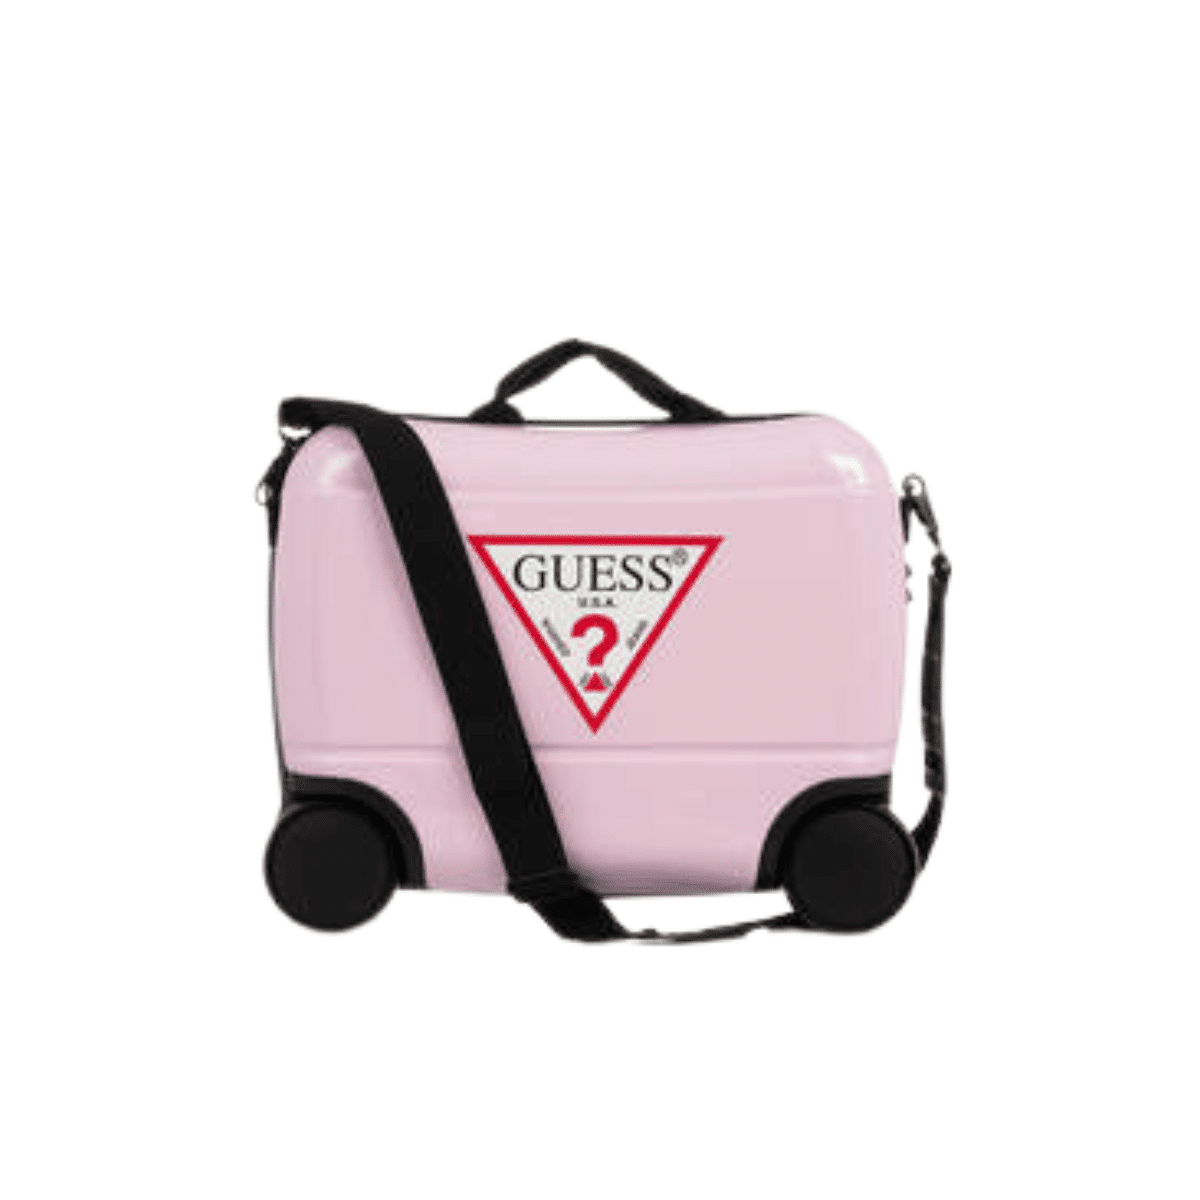 guess kids pink travel ride on suitcase